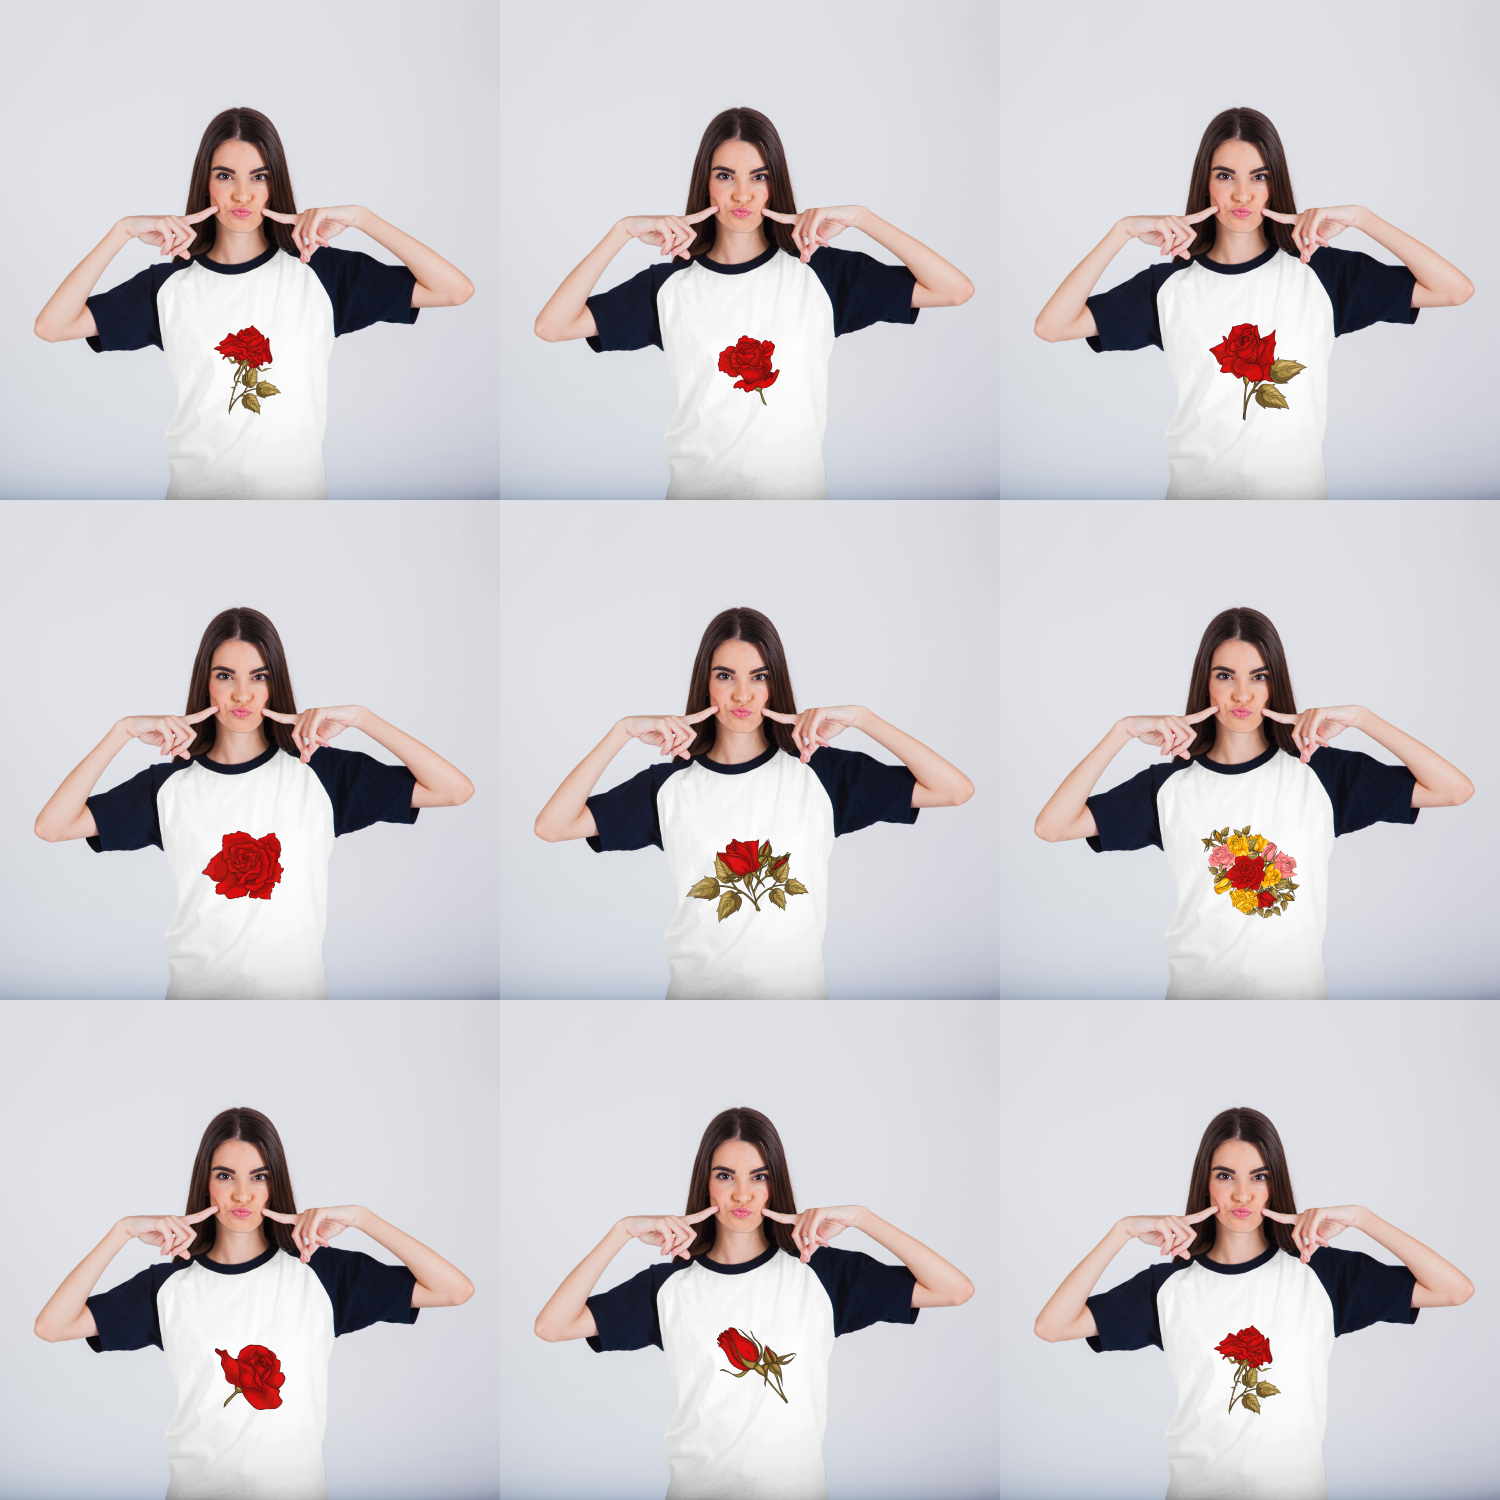 Images with Rose on t-shirt.